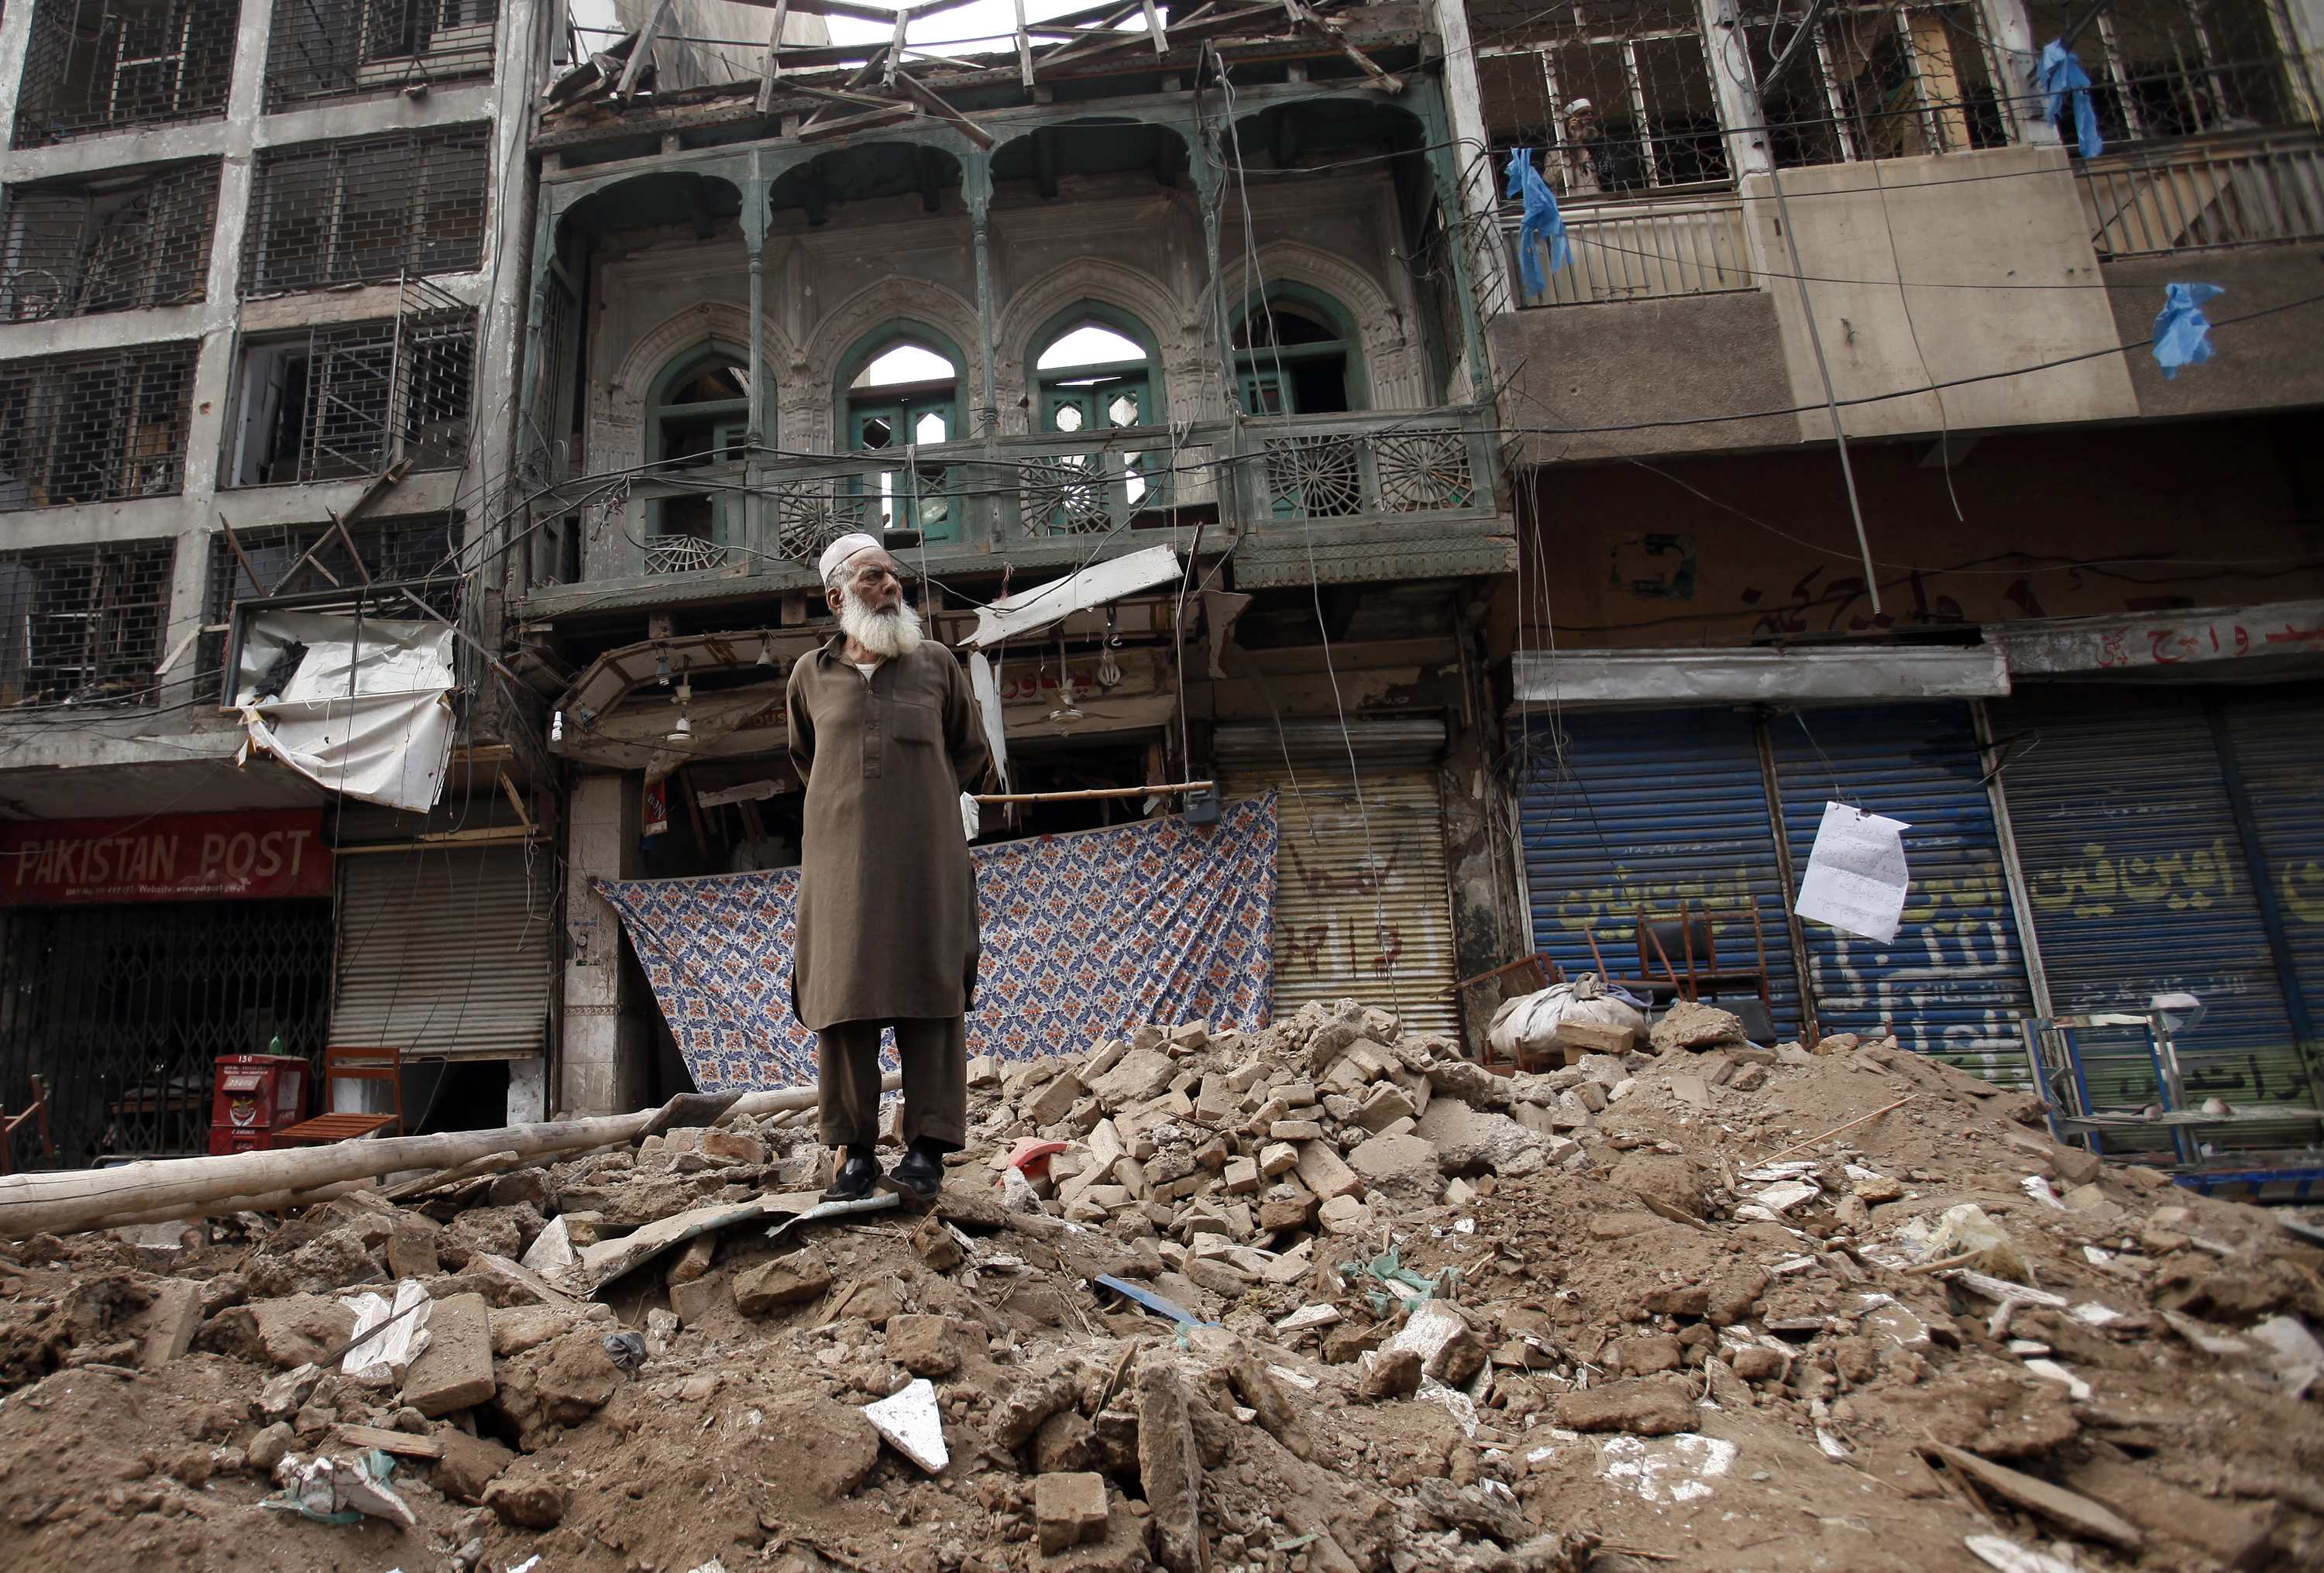 A man stands on a pile of rubble in front of a damaged building after it was hit by a bomb blast. Photo: Reuters